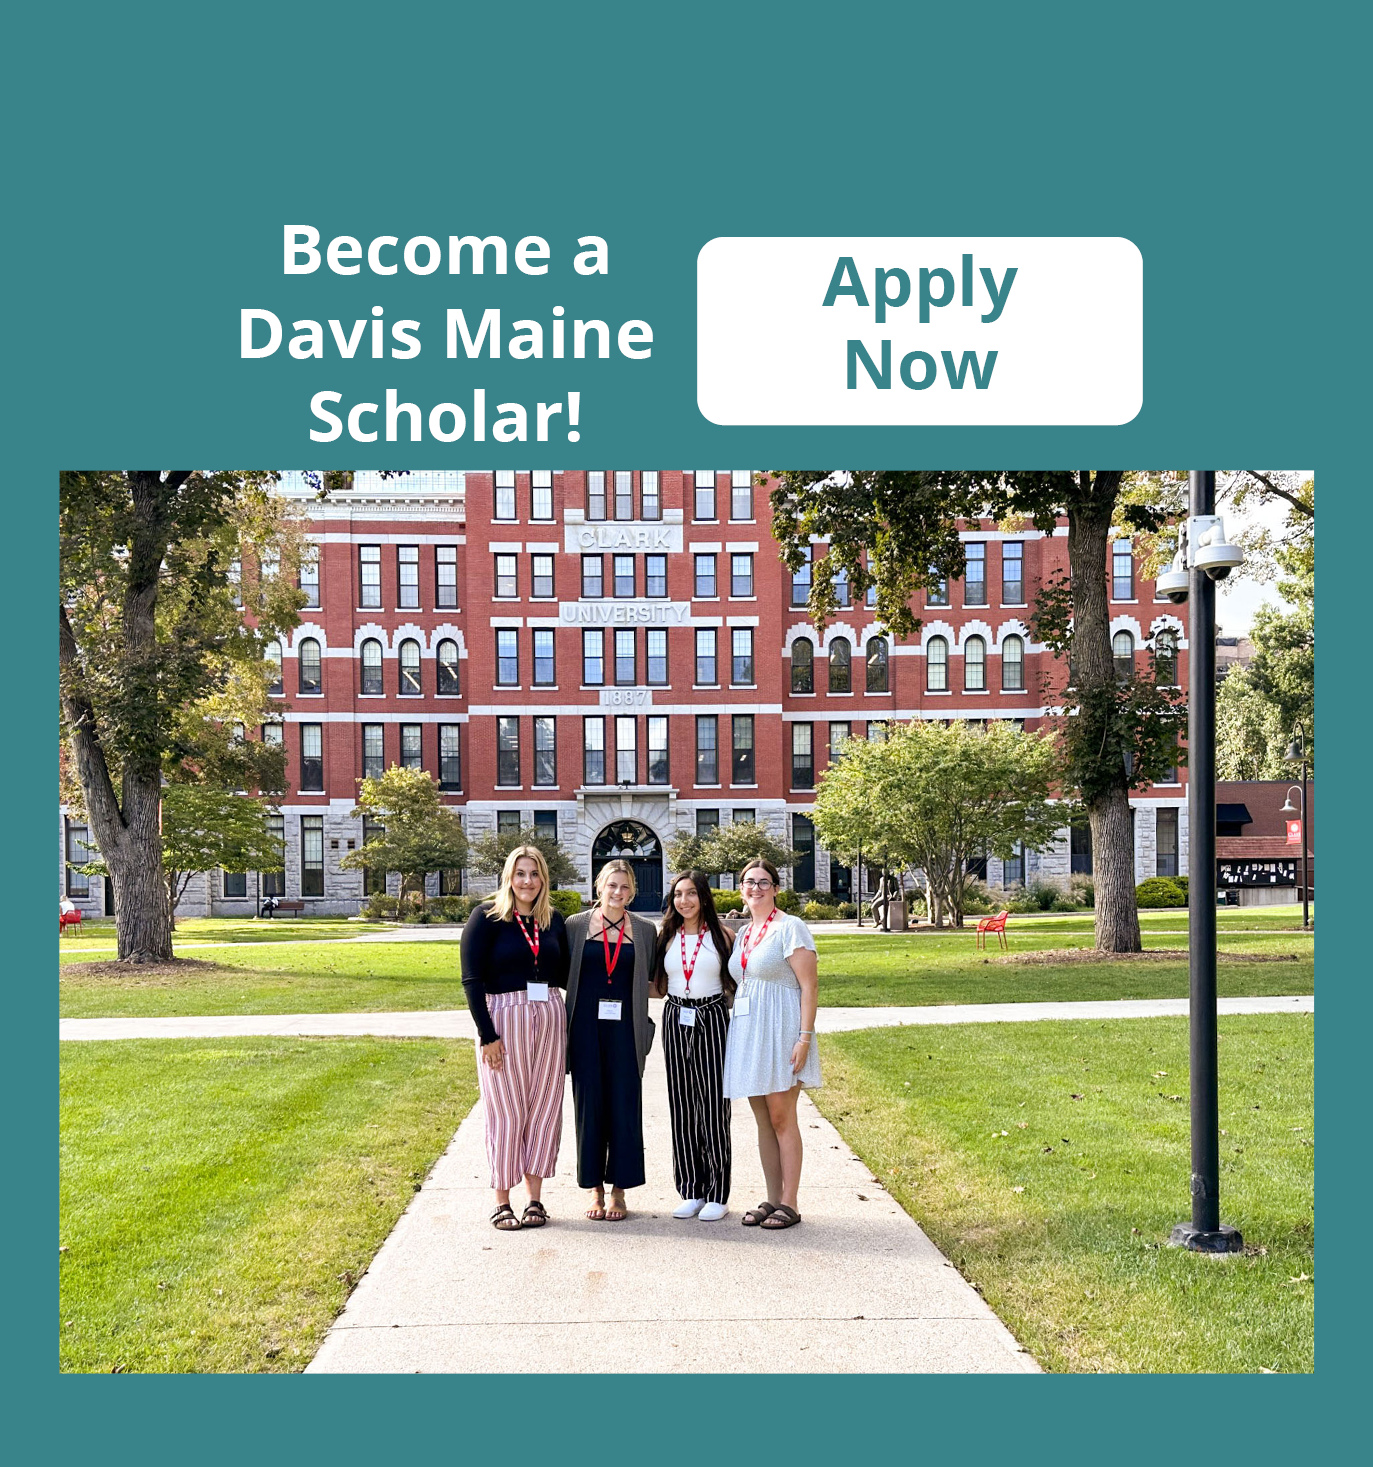 A color photo of four young women standing in front of a building reading "Clark University 1887." There is a banner on the page reading "Become a Davis Maine Scholar! Apply Now" Click there to apply